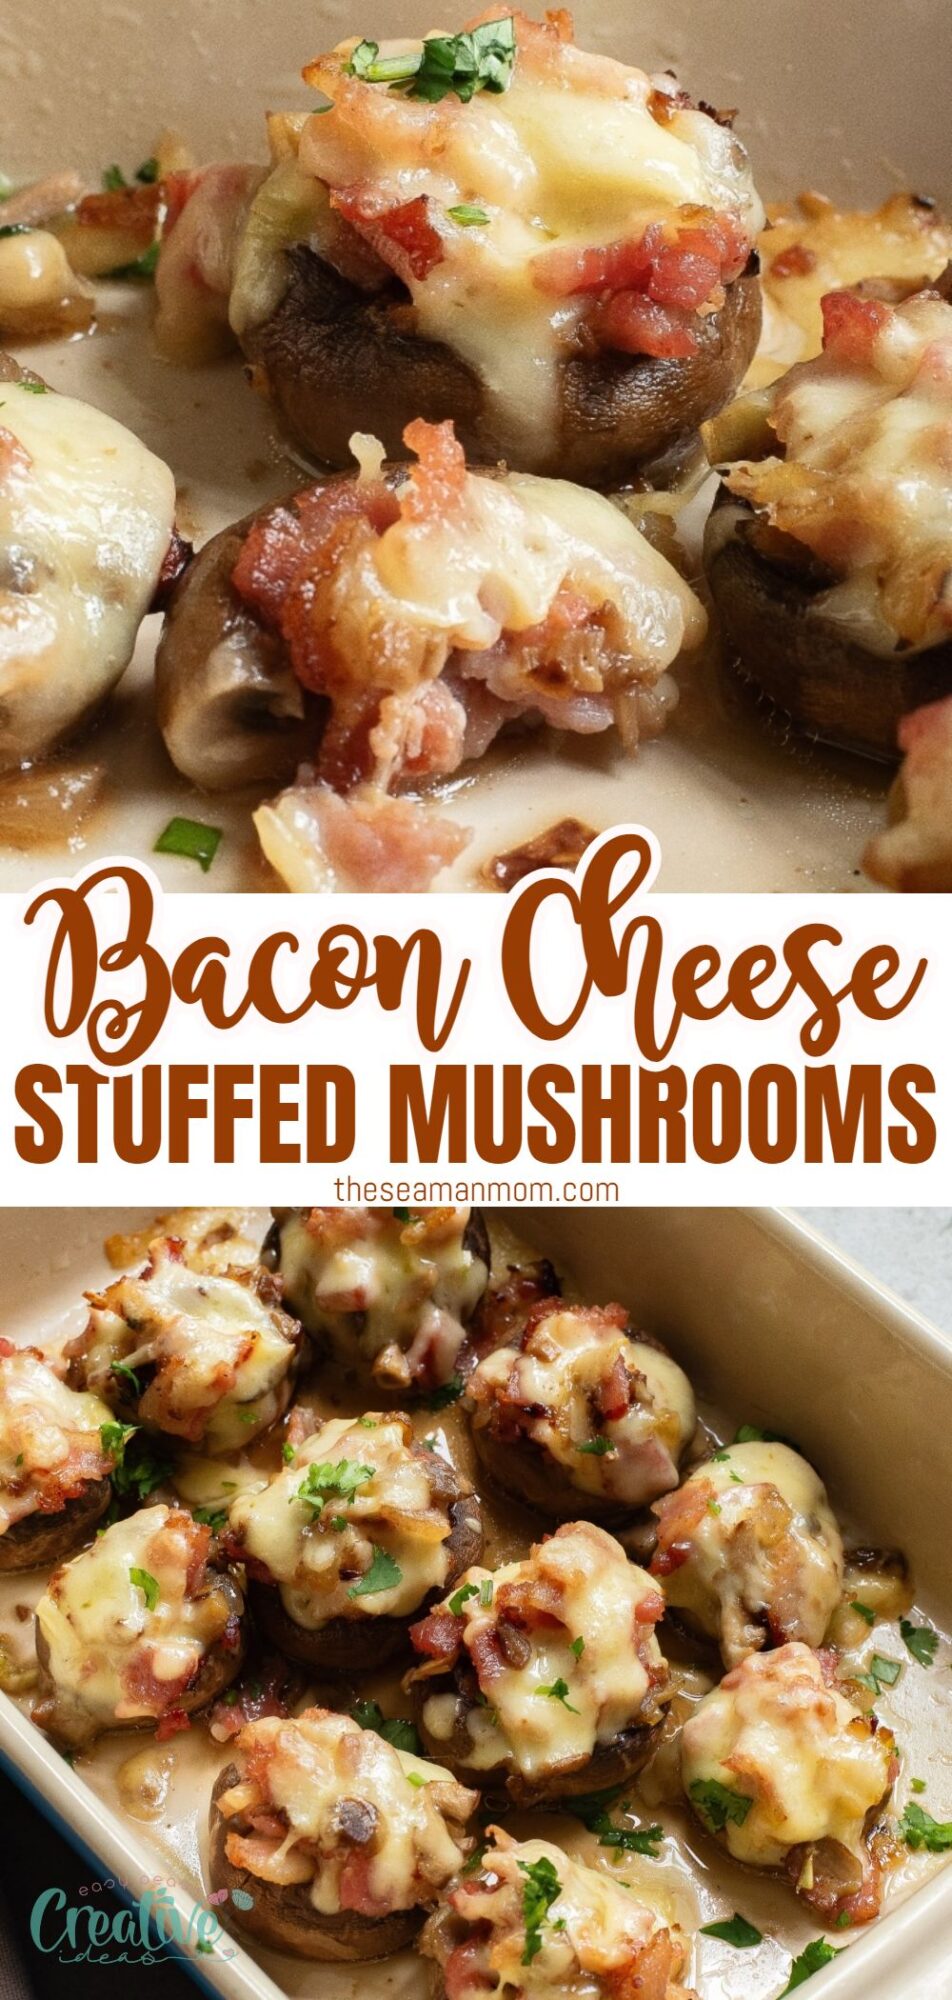 Bacon and cheese stuffed mushrooms: perfect appetizer to impress guests with savory bacon, gooey cheese, and earthy mushrooms.